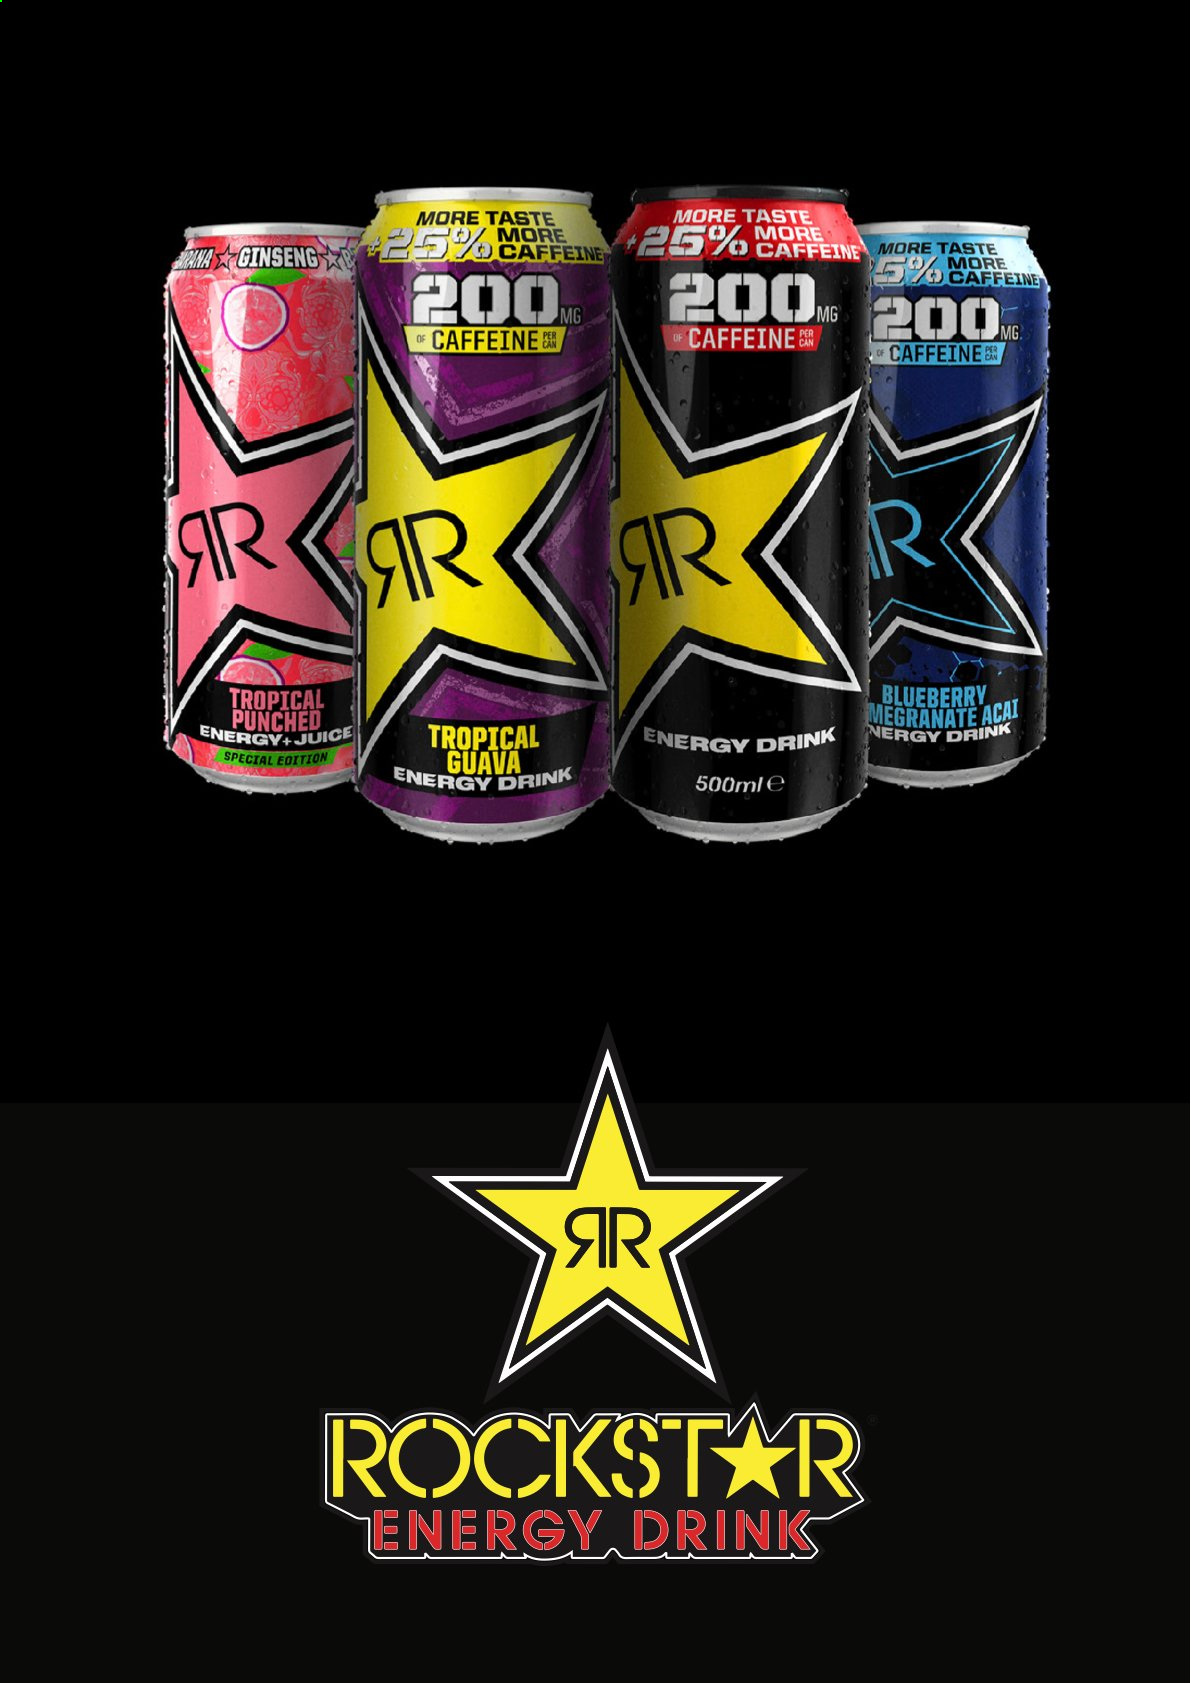 thumbnail - MUSGRAVE Market Place offer  - 09.05.2021 - 05.06.2021 - Sales products - guava, juice, energy drink, Rockstar. Page 17.